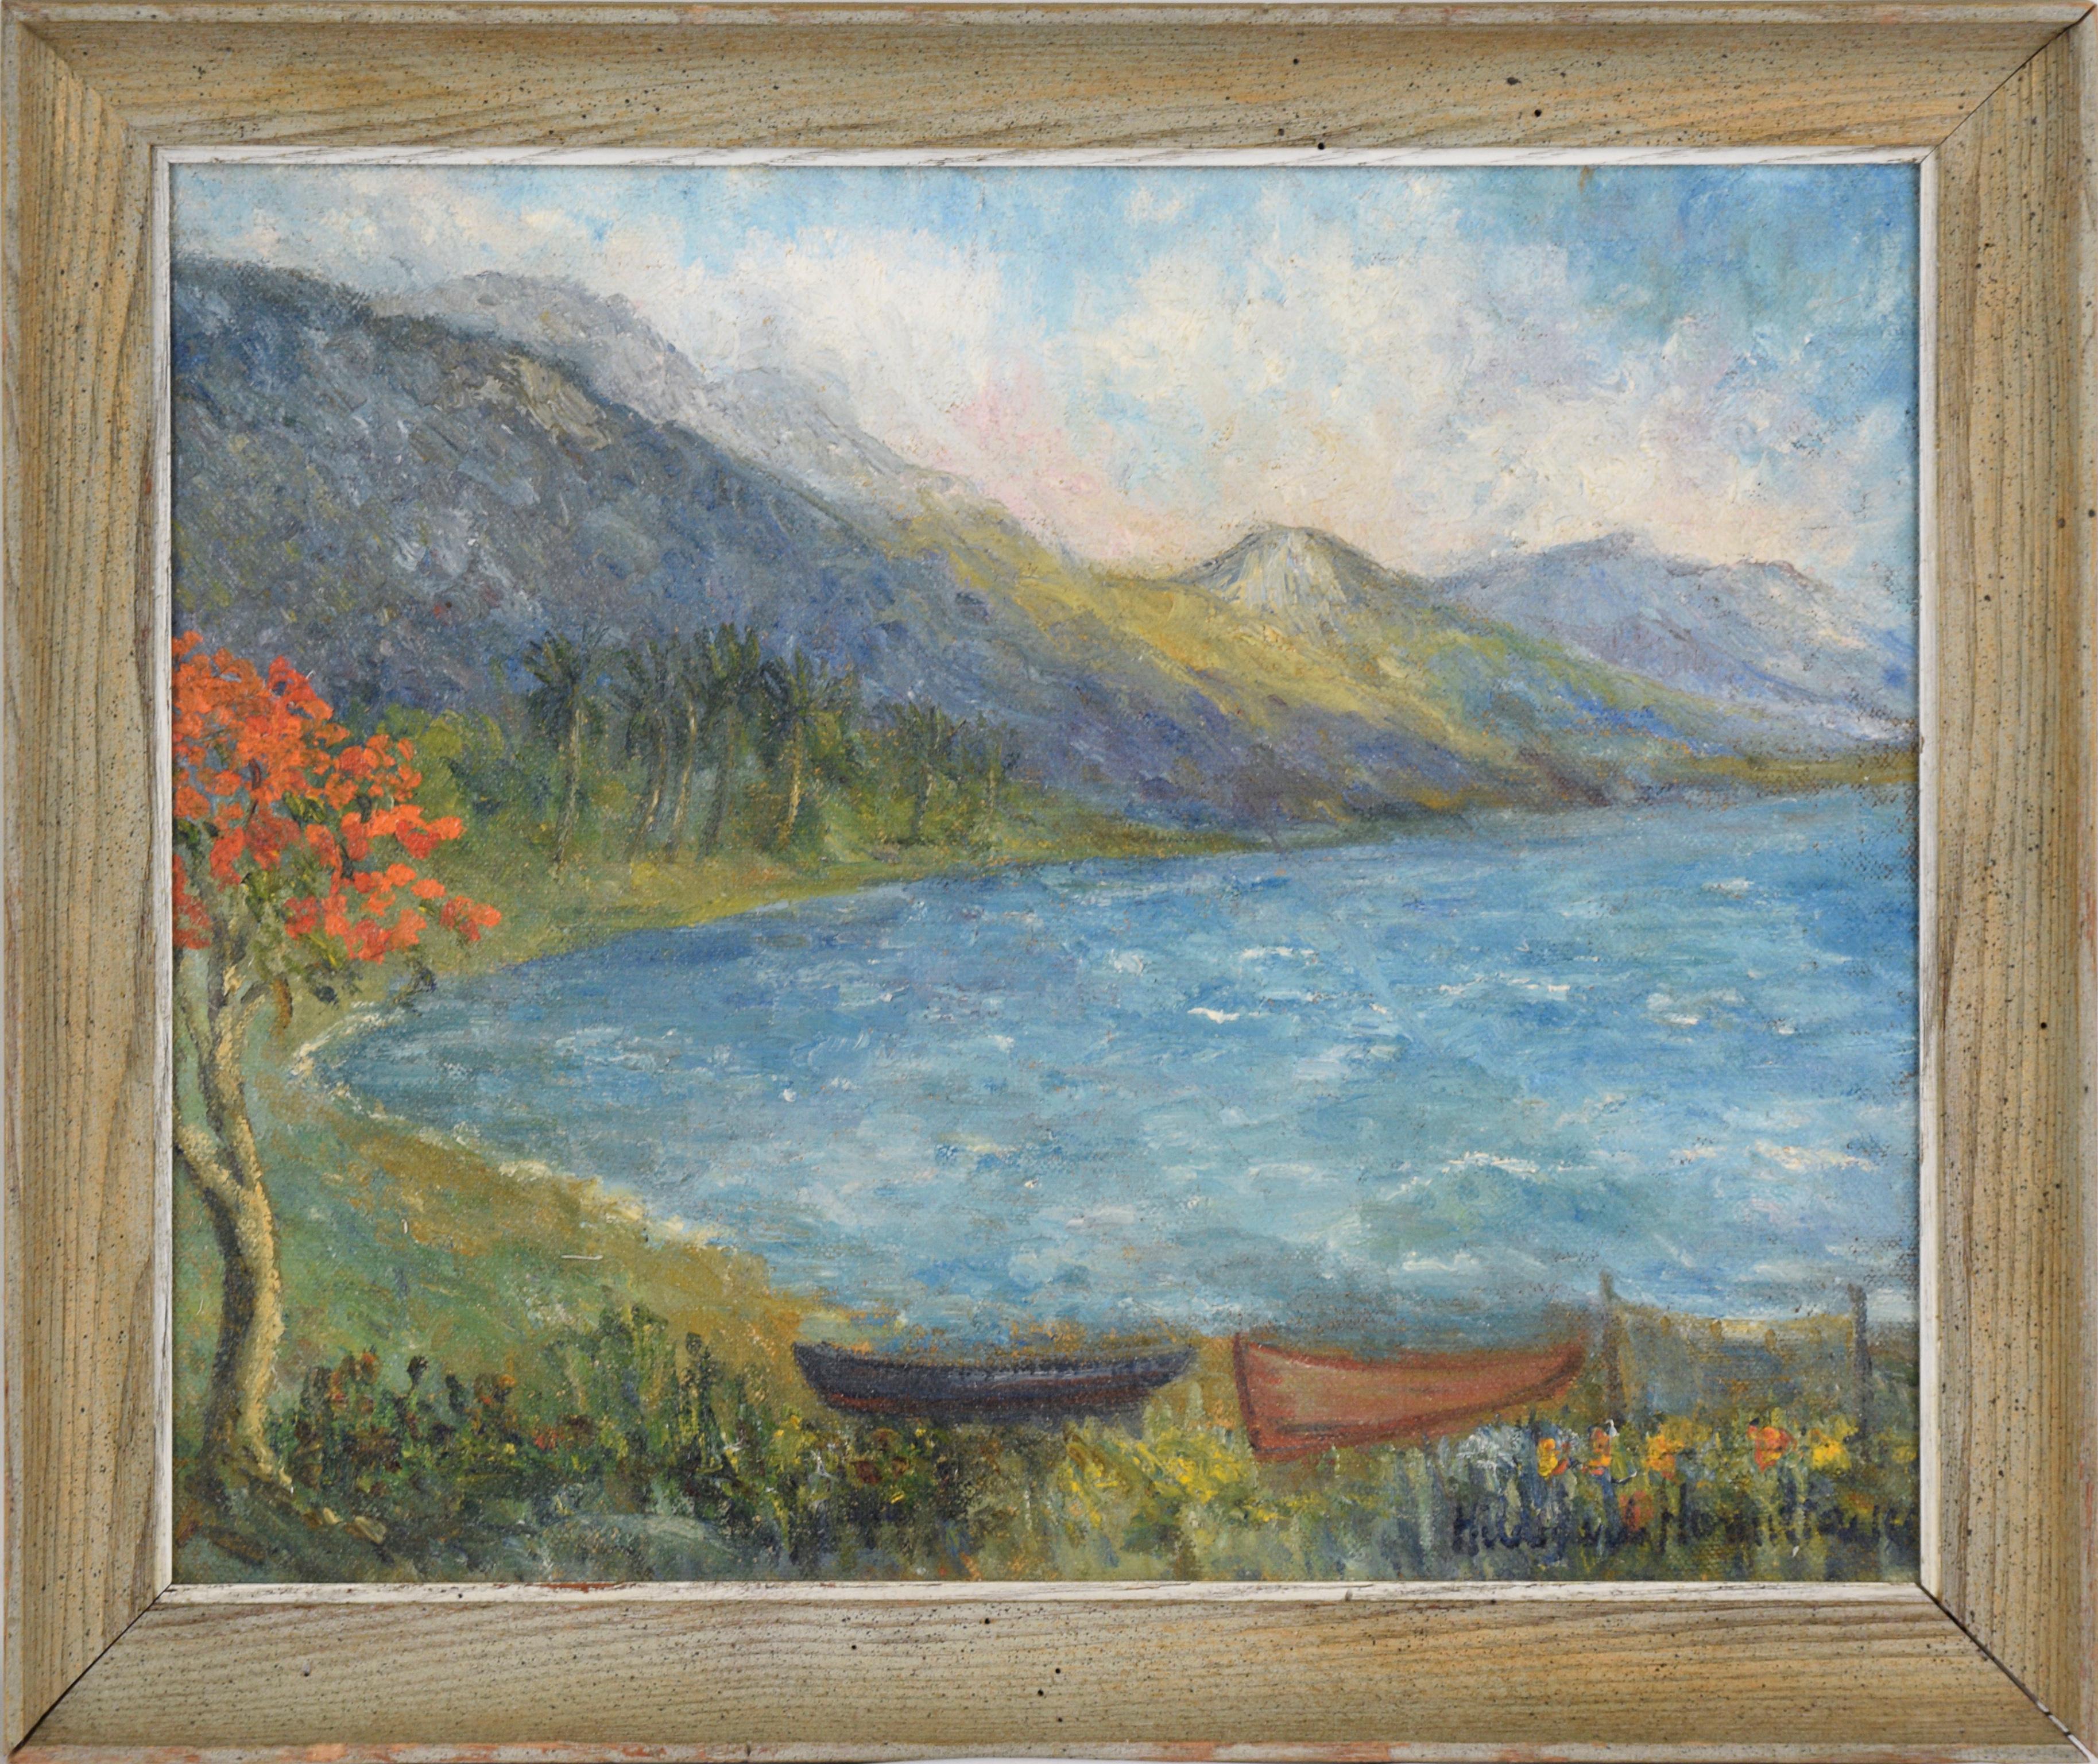 Hildegarde Hamilton Landscape Painting - Island Mountains and Boats by the Coast, Mid 20th Century Landscape